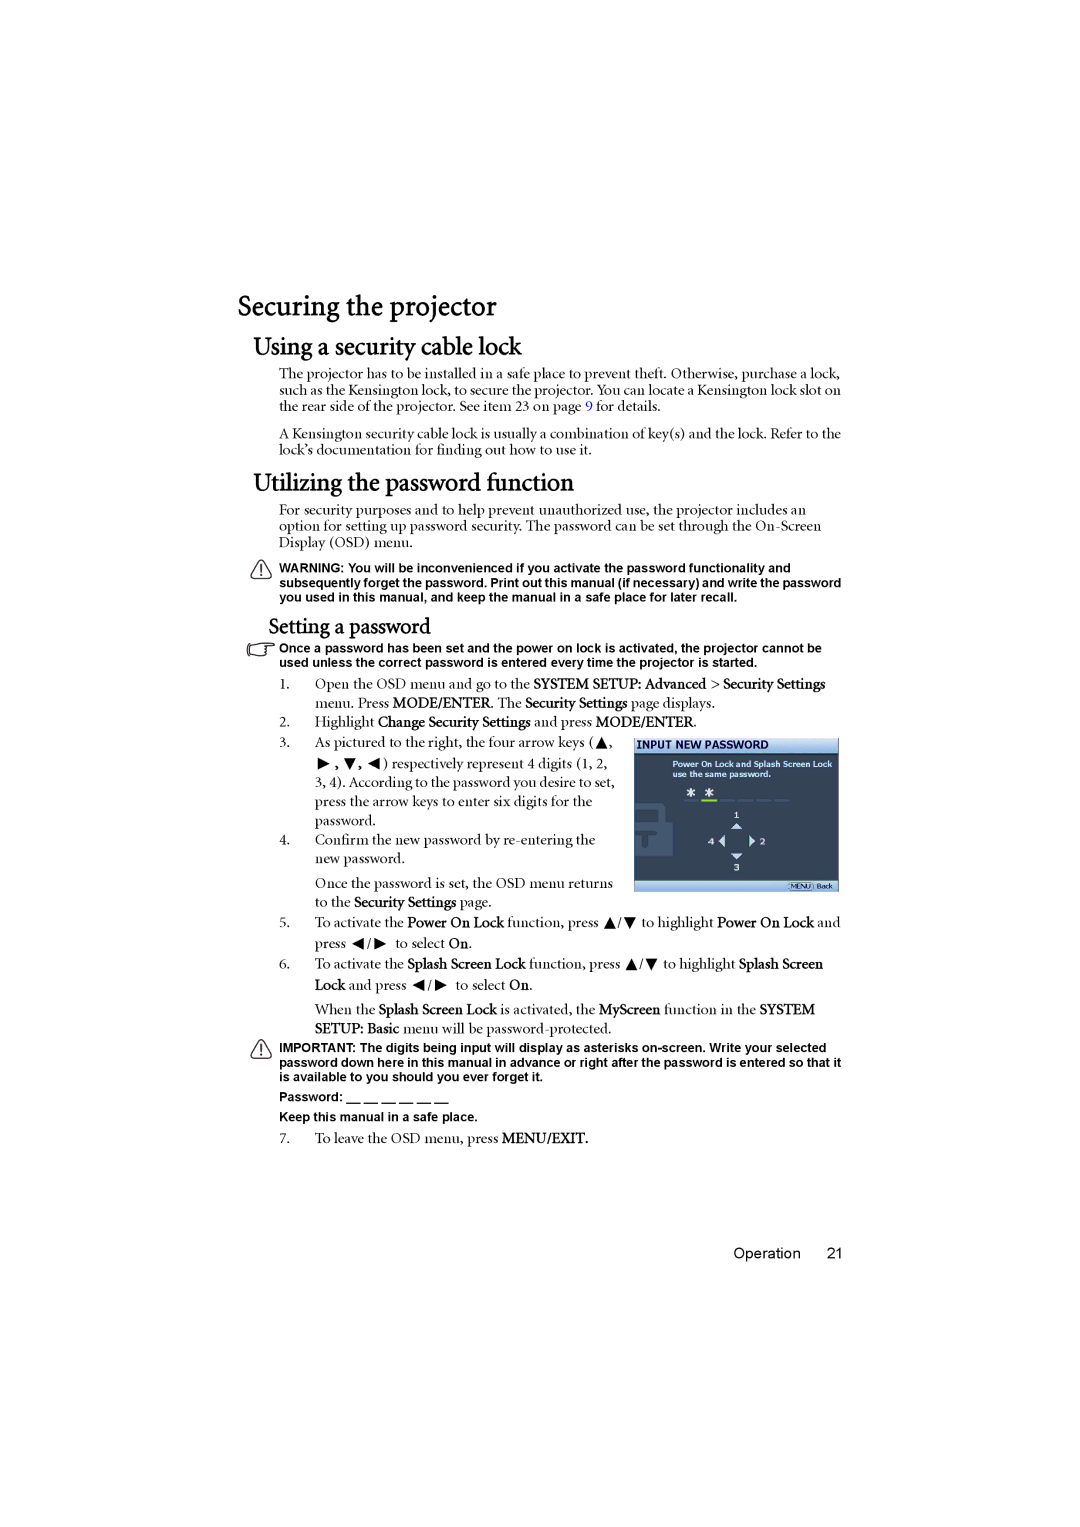 BenQ MS614, MX615 Securing the projector, Using a security cable lock, Utilizing the password function, Setting a password 